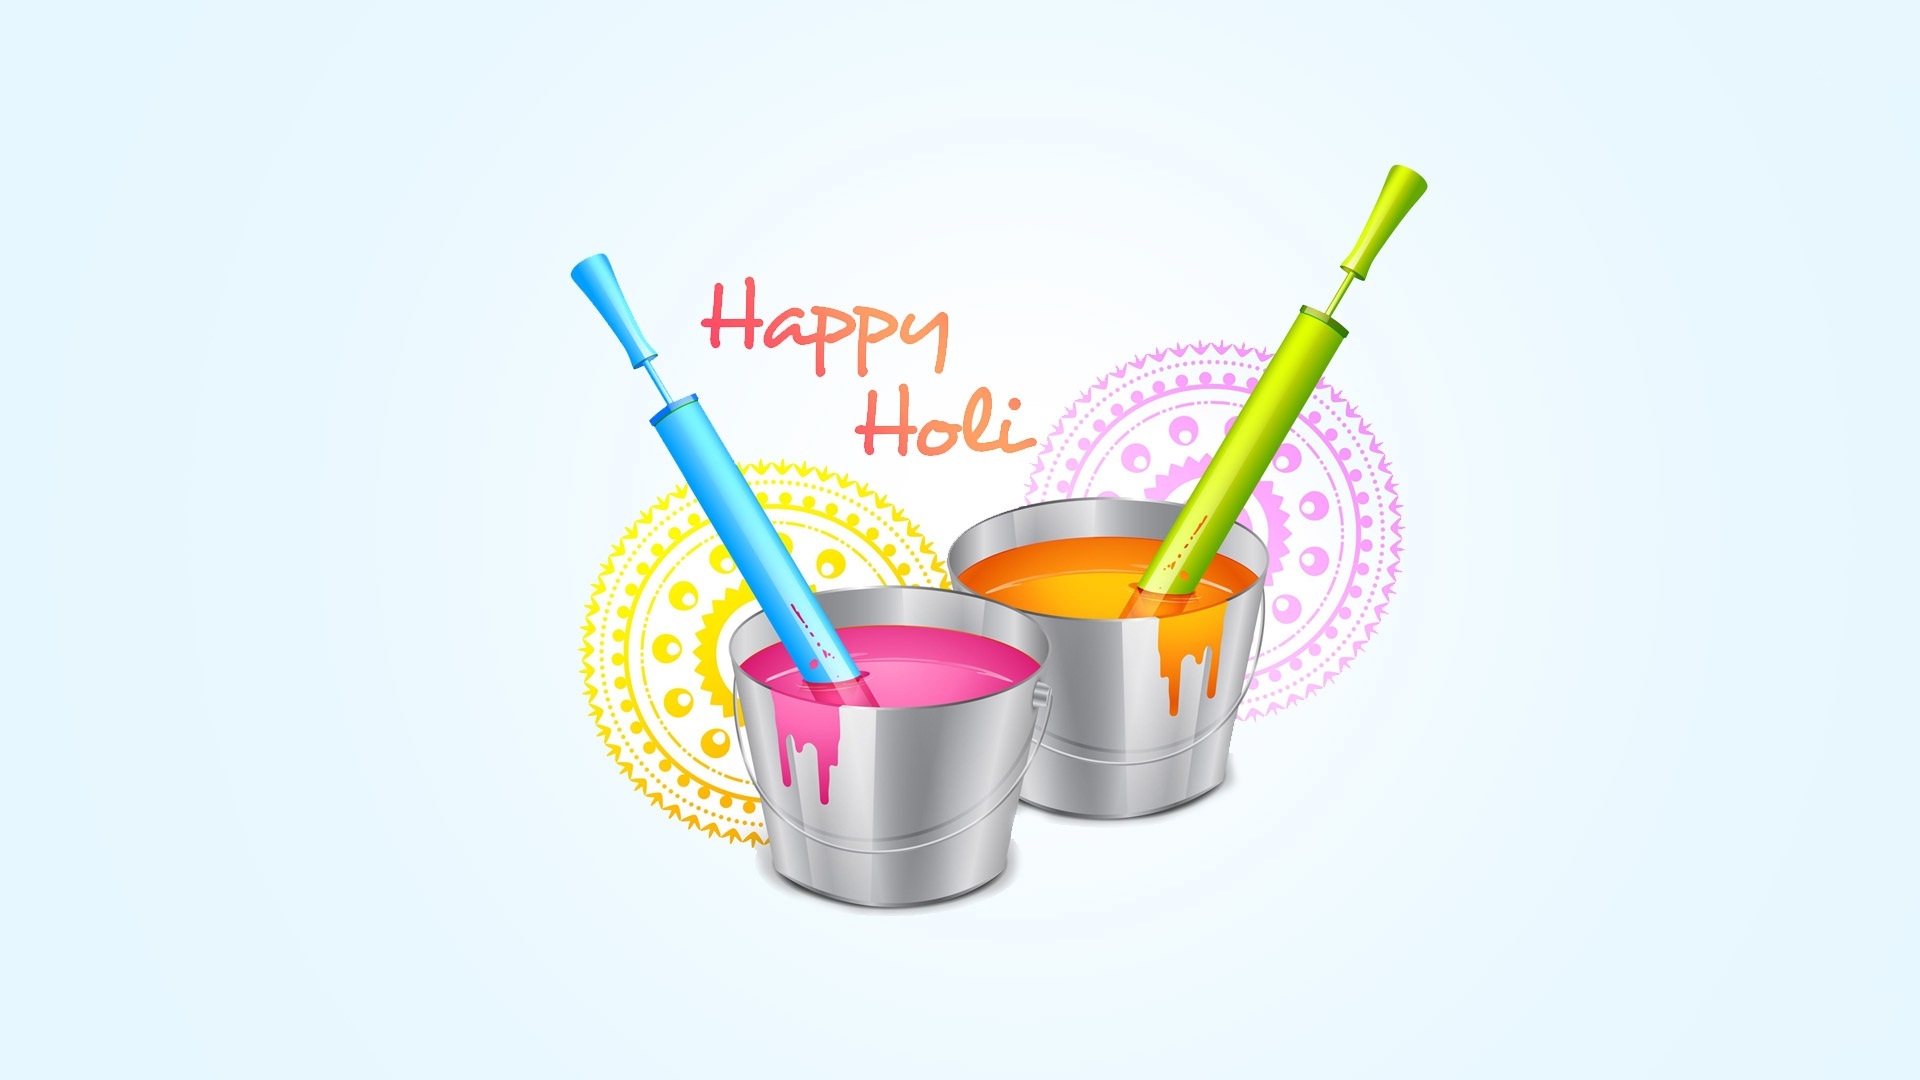 Download The Festival Of Colors Happy Holi Wallpapers